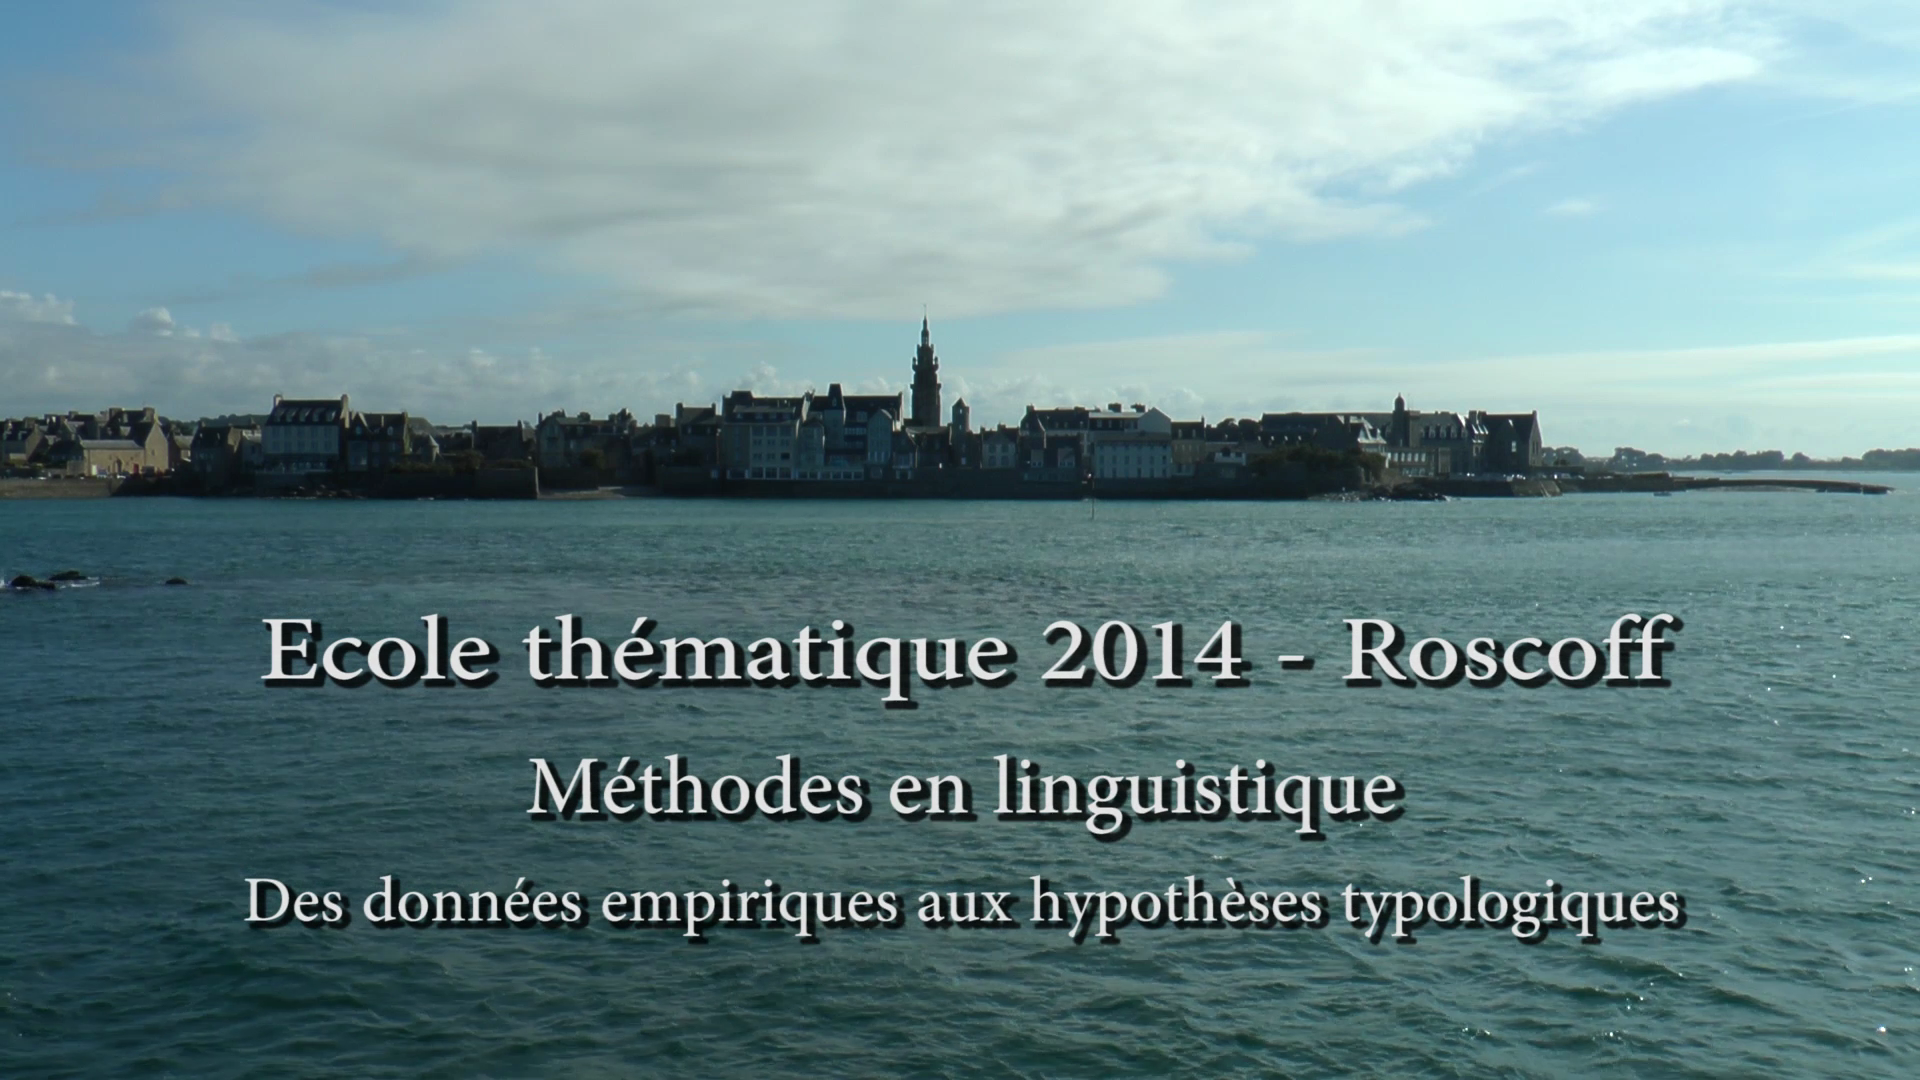 Martin Haspelmath, "The relation between typological linguistics and language description"